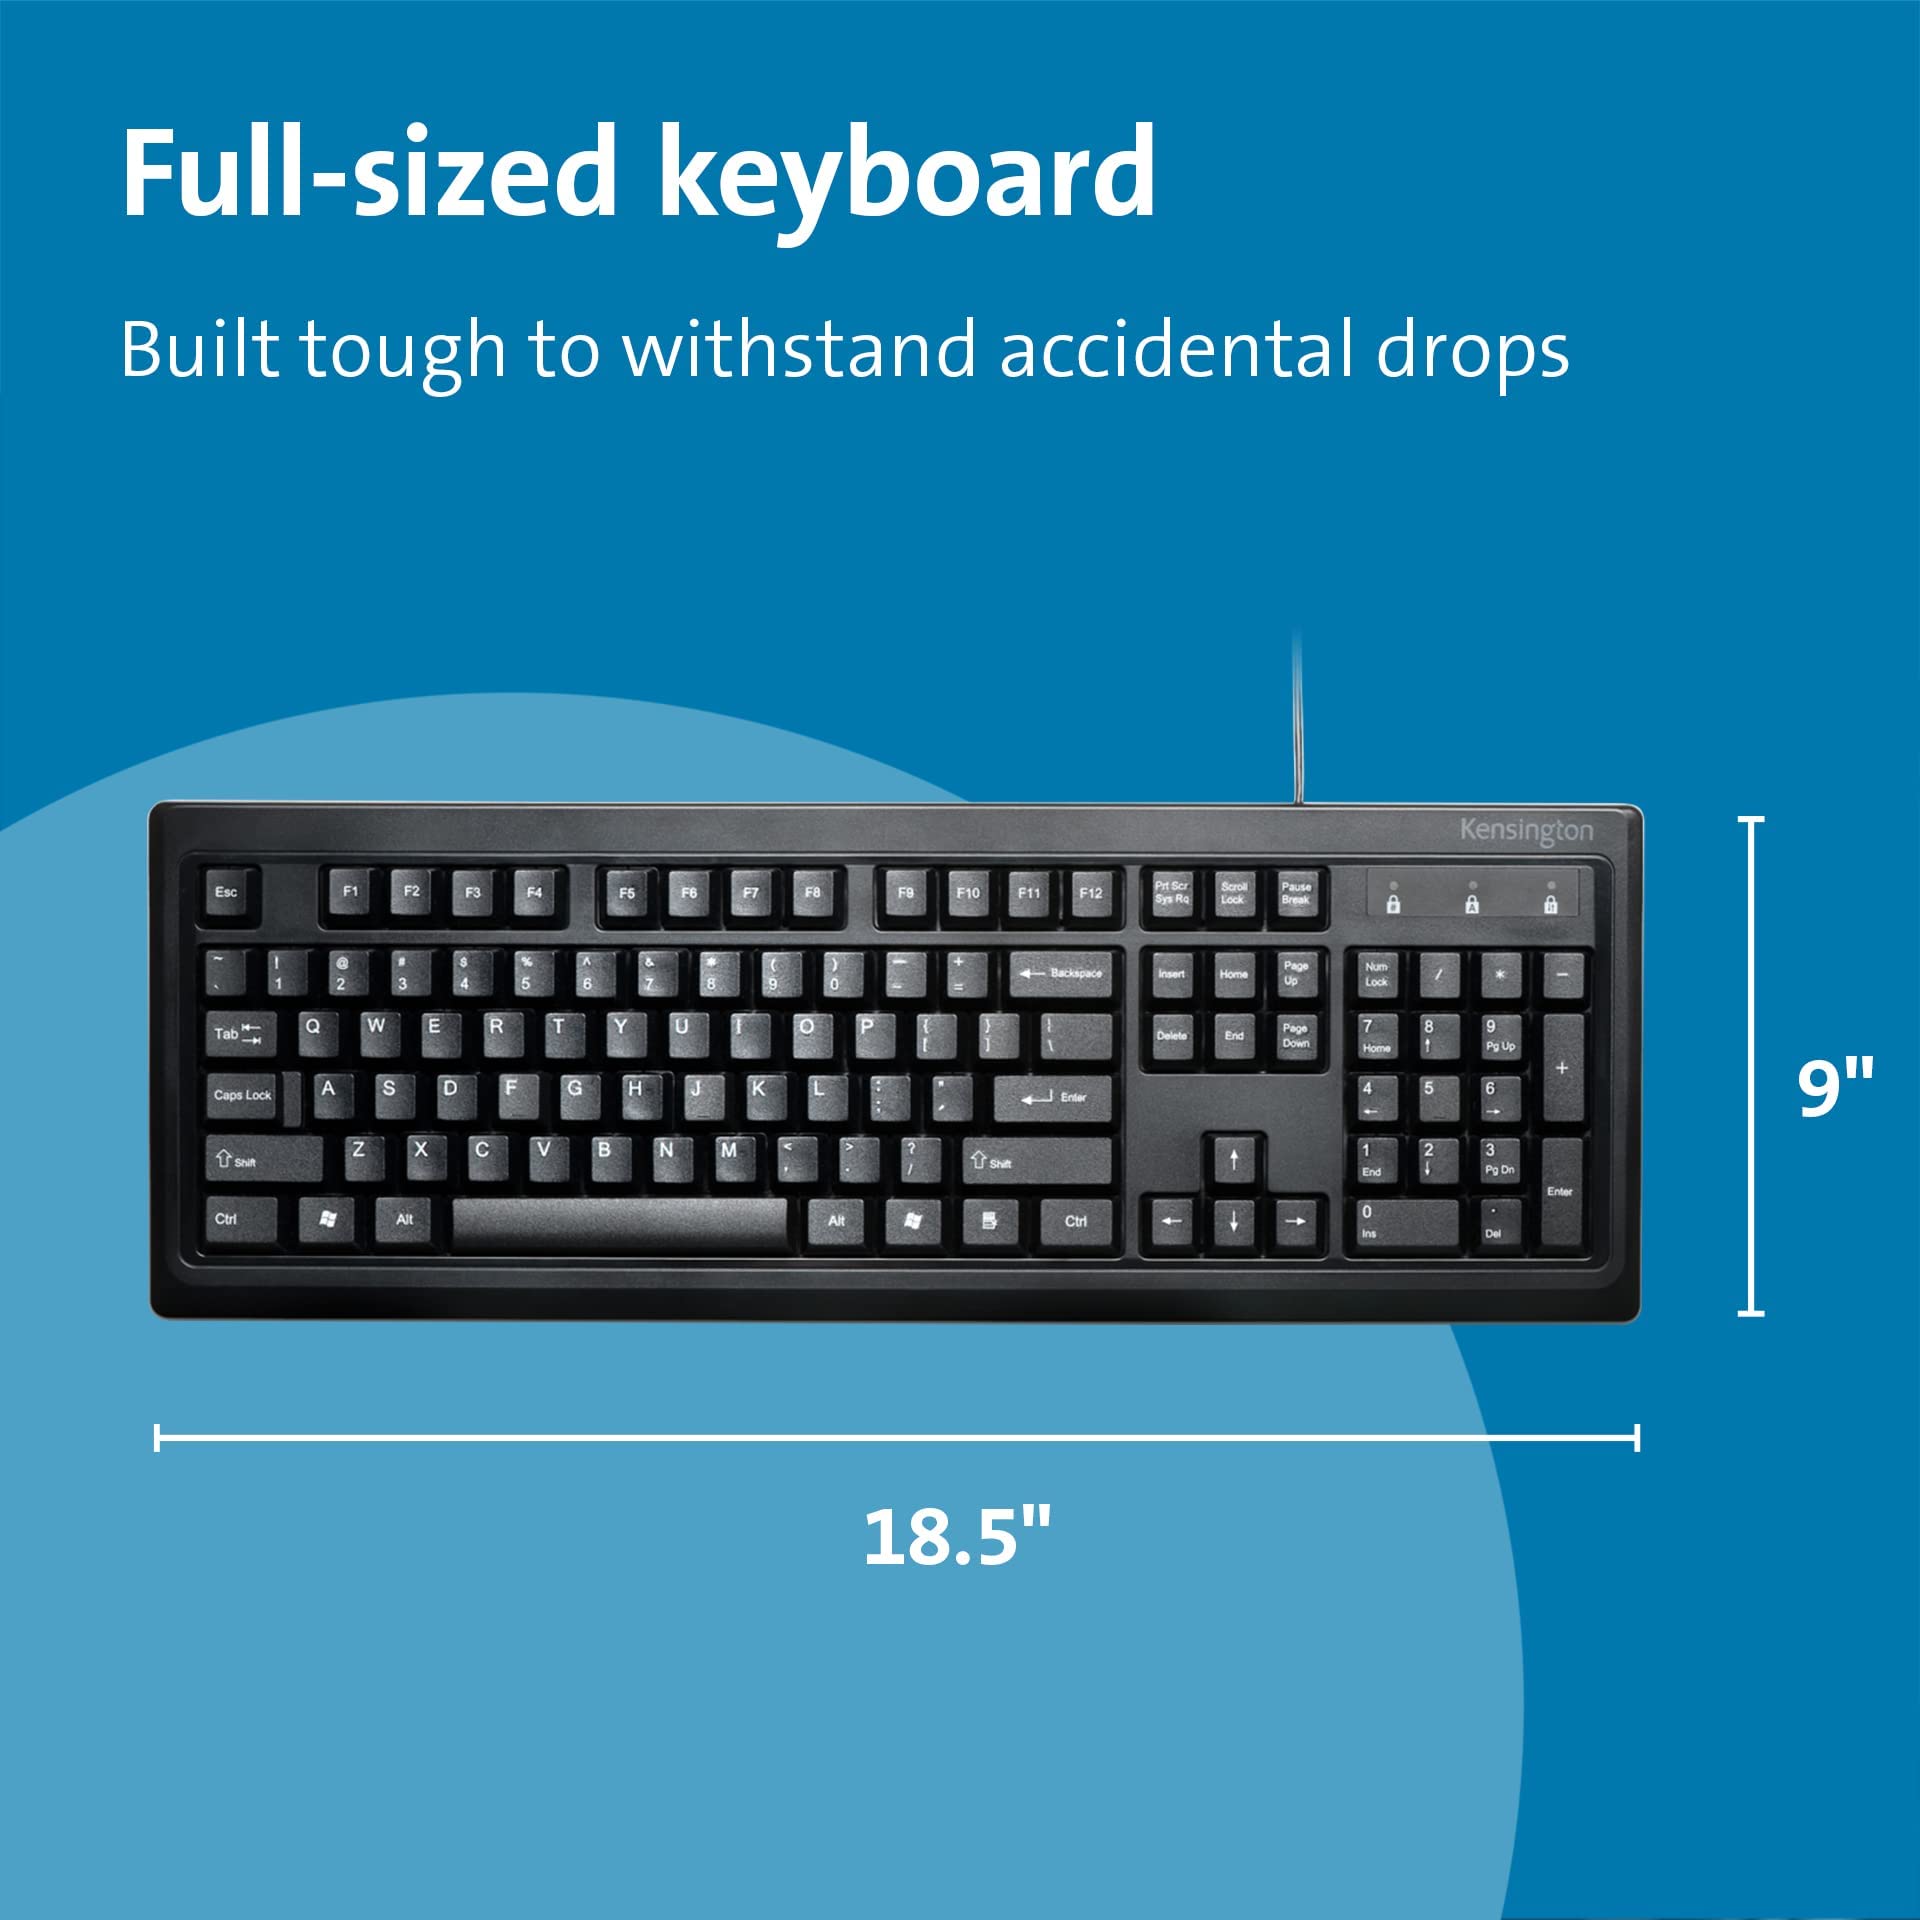 Kensington- wired keyboard for PC, Laptop, Desktop, Computer, notebook. USB Keyboard compatible with Dell, Acer, HP, Samsung and more, with UK layout - Black (1500109)